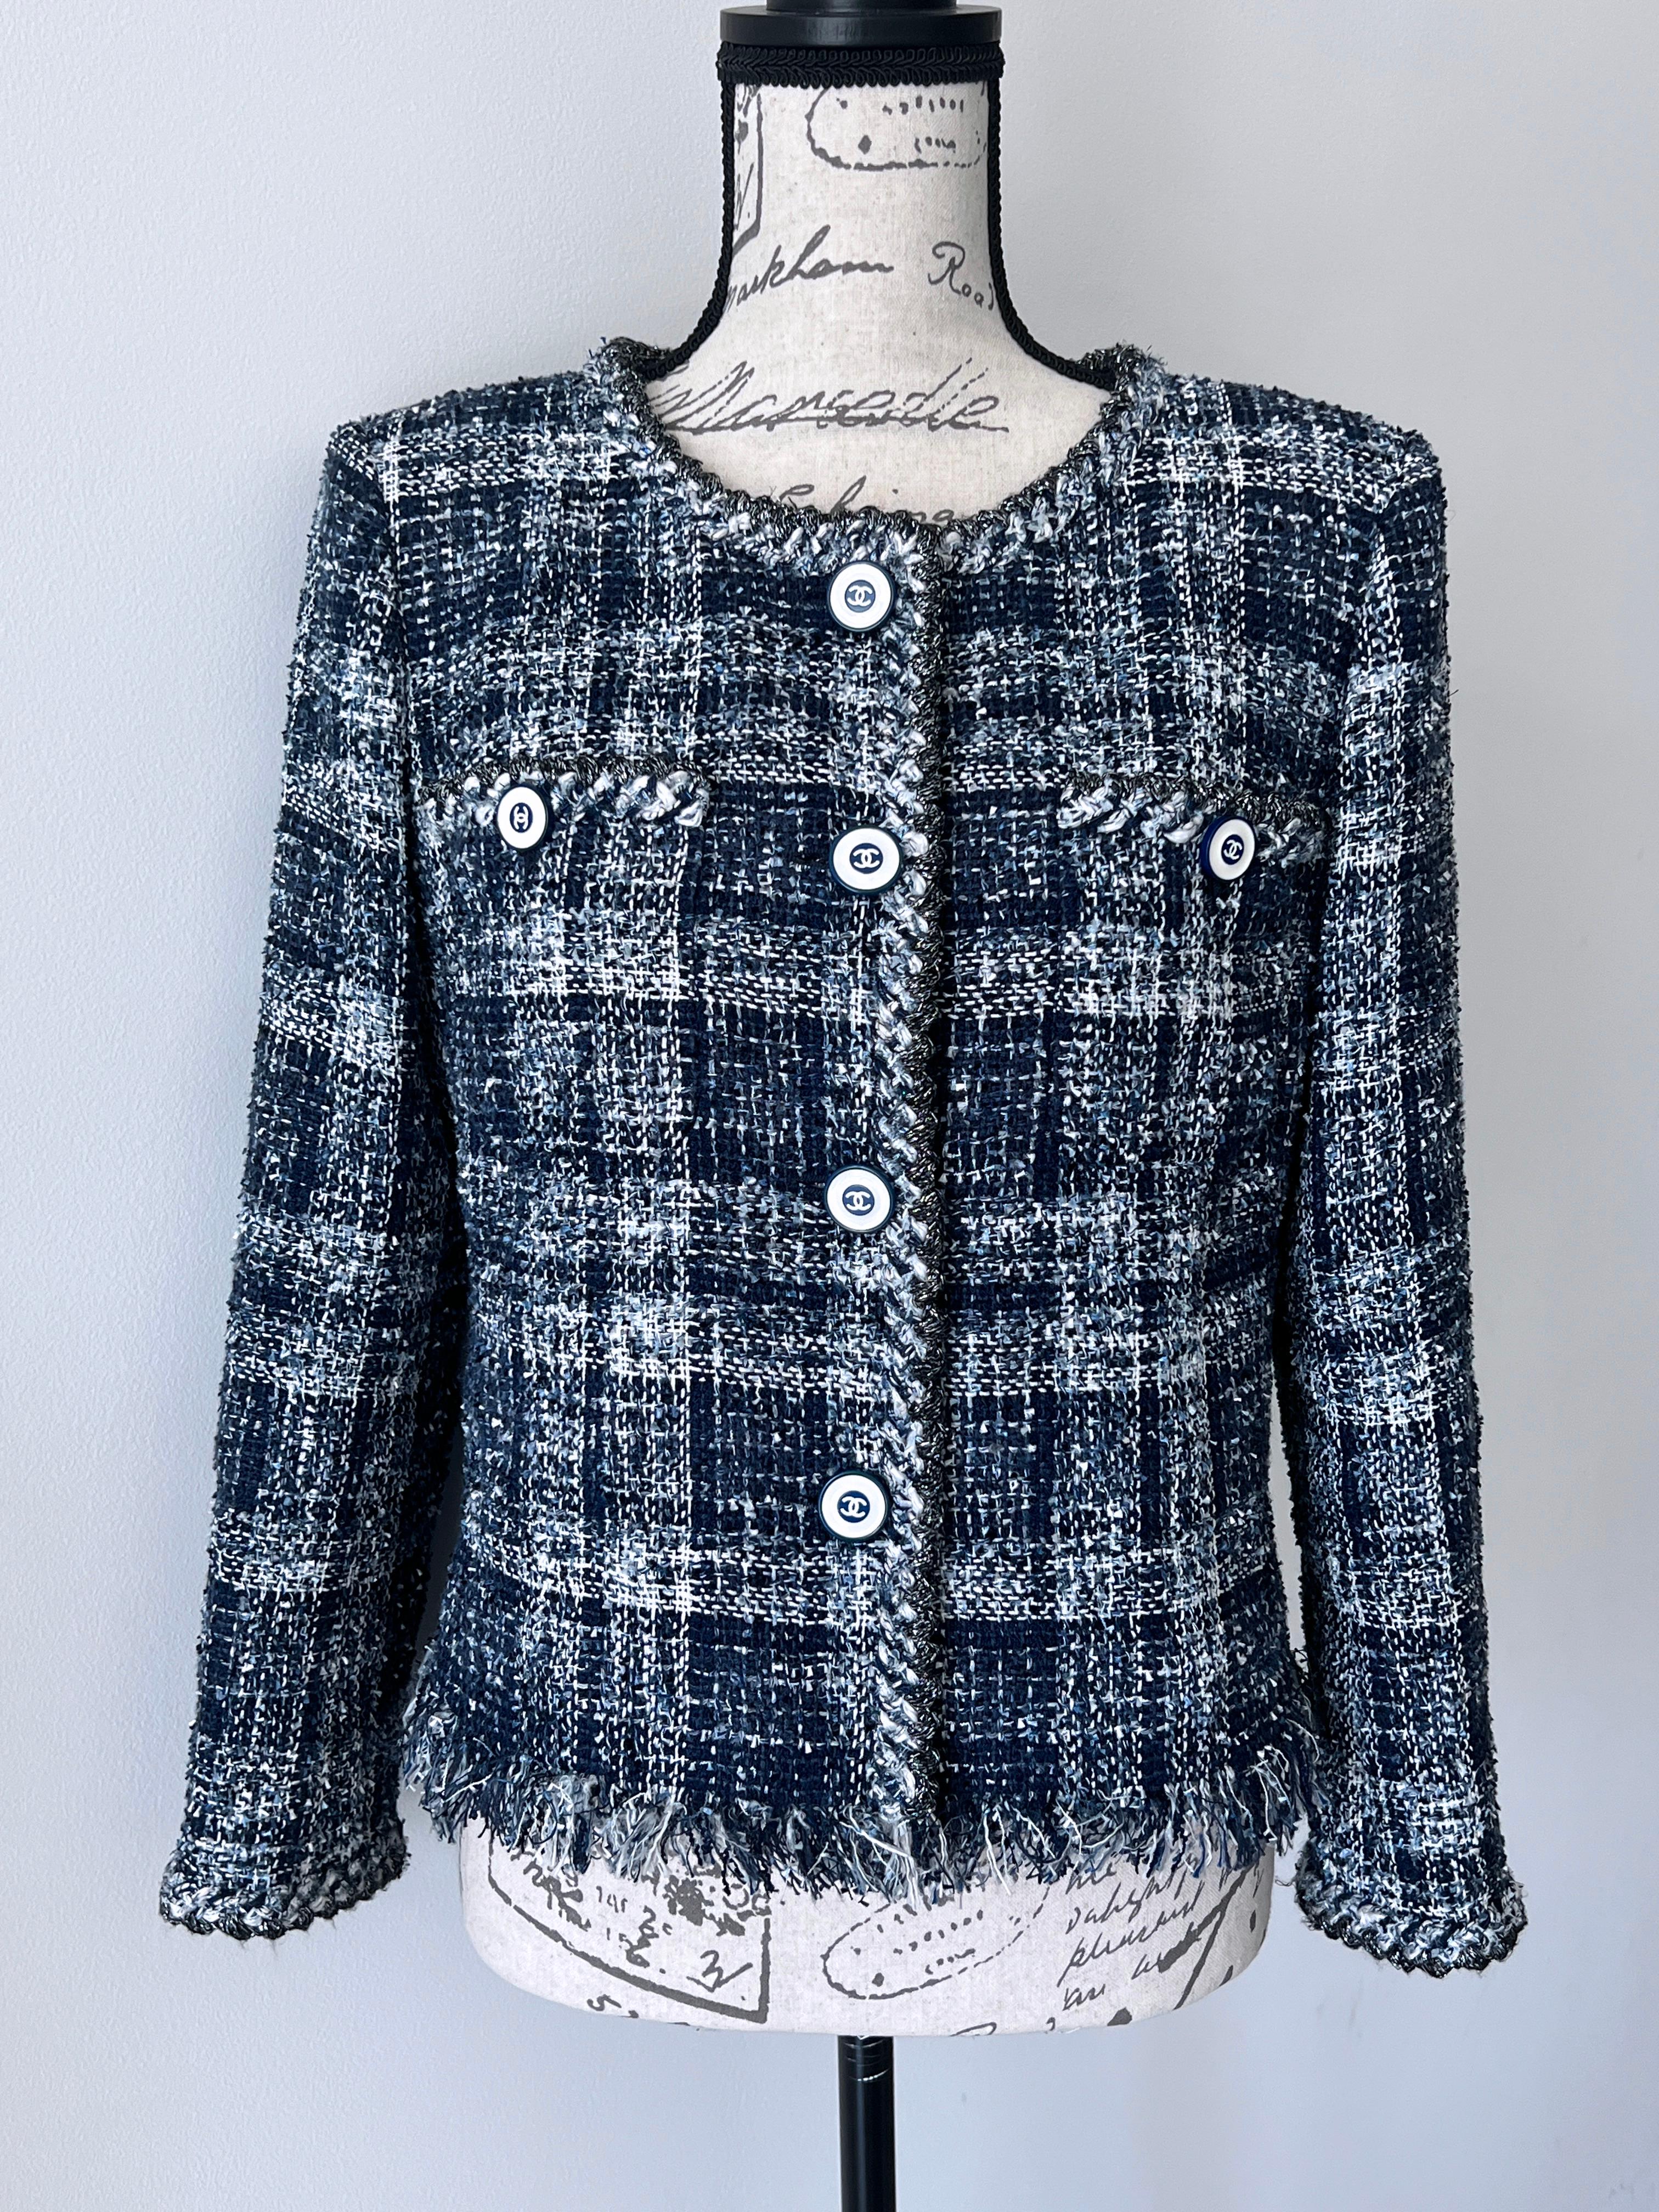 Women's or Men's Chanel 2018 Style Icon Tweed Jacket